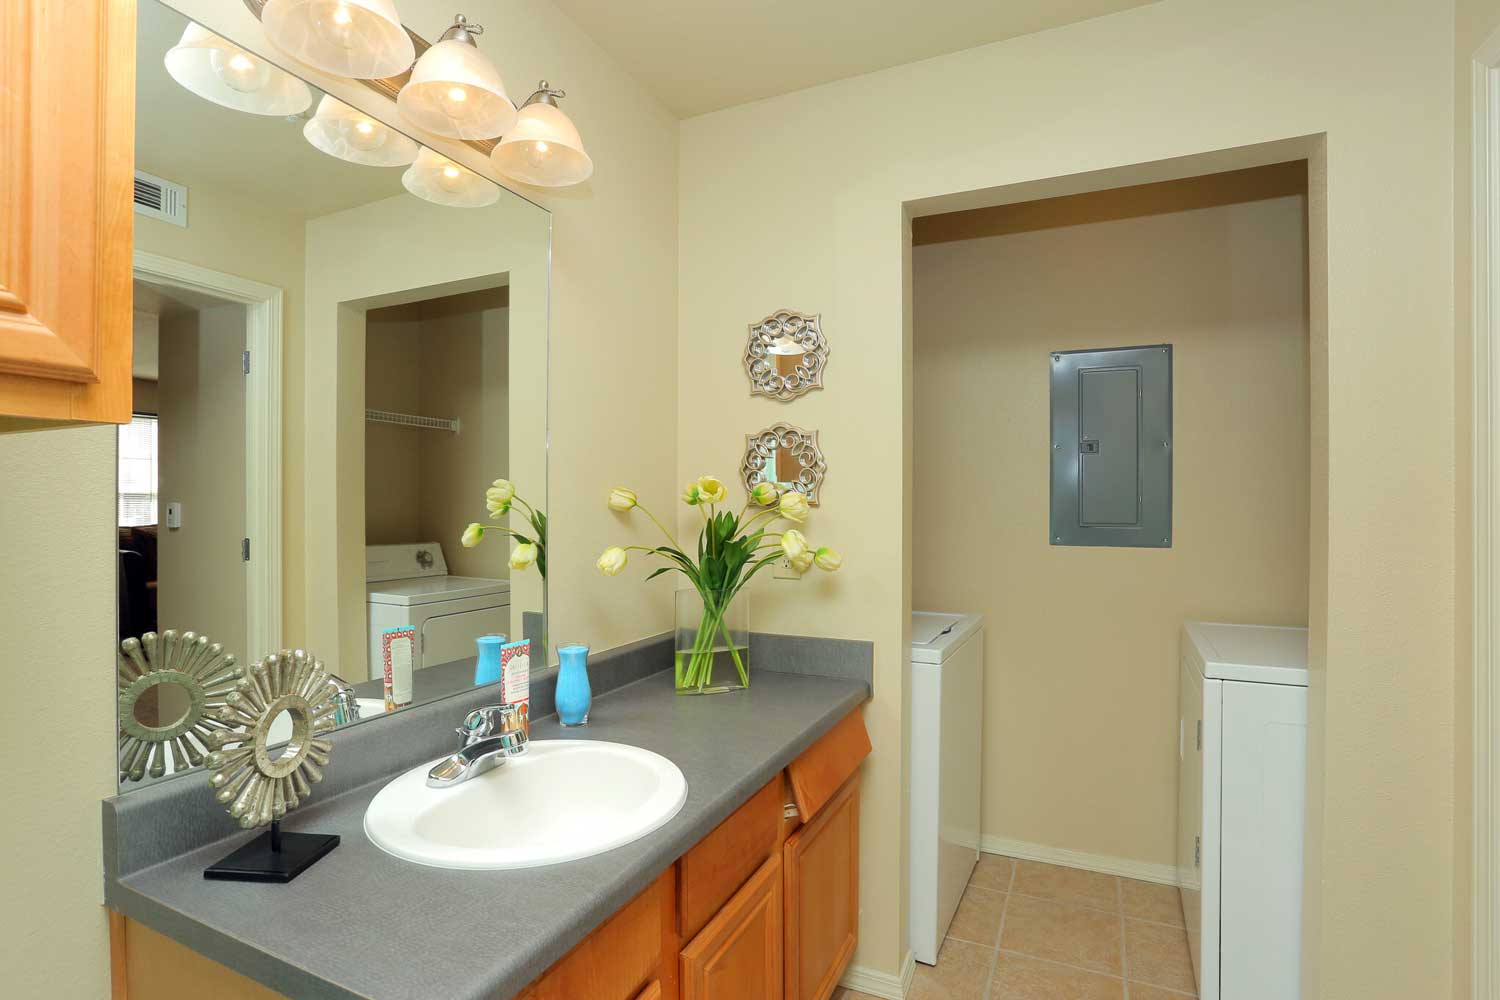 Refined Bathroom at the Oakmont Apartment Homes in Catoosa, OK